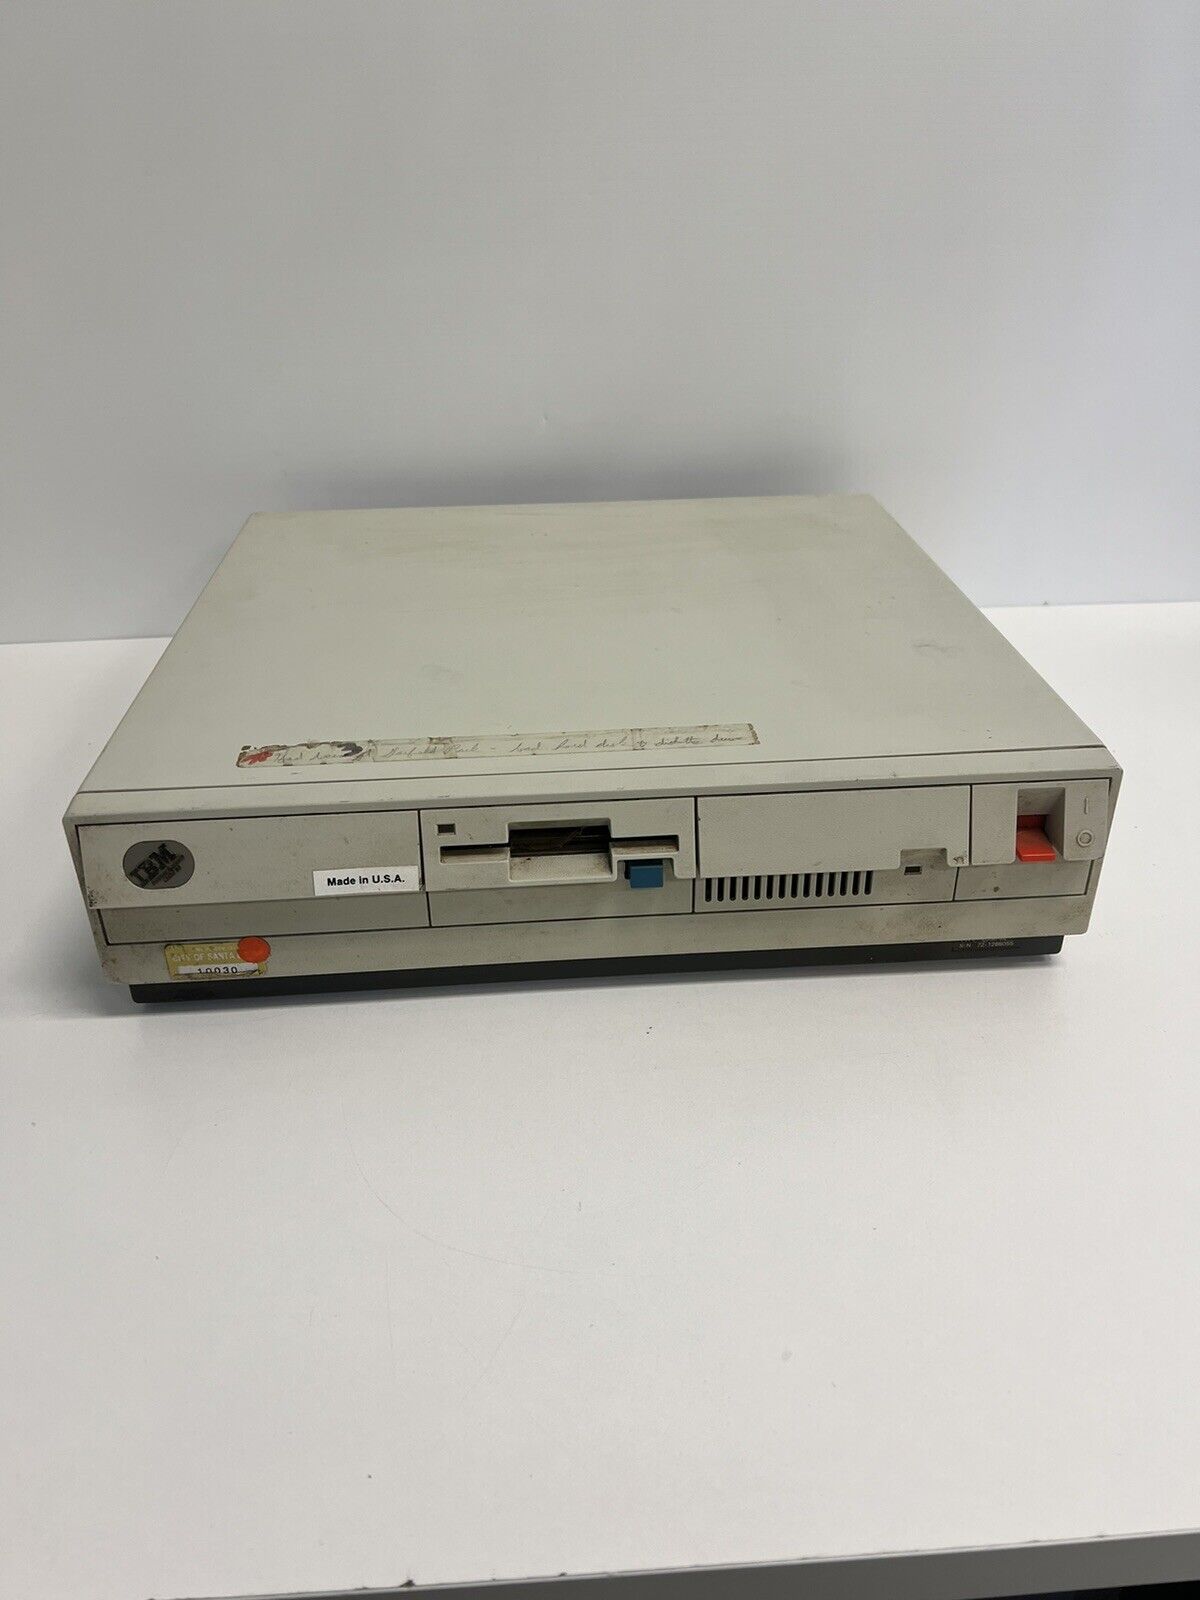 IBM PS/2 Type 8530 Model 30 286 Personal Computer Vintage Untested